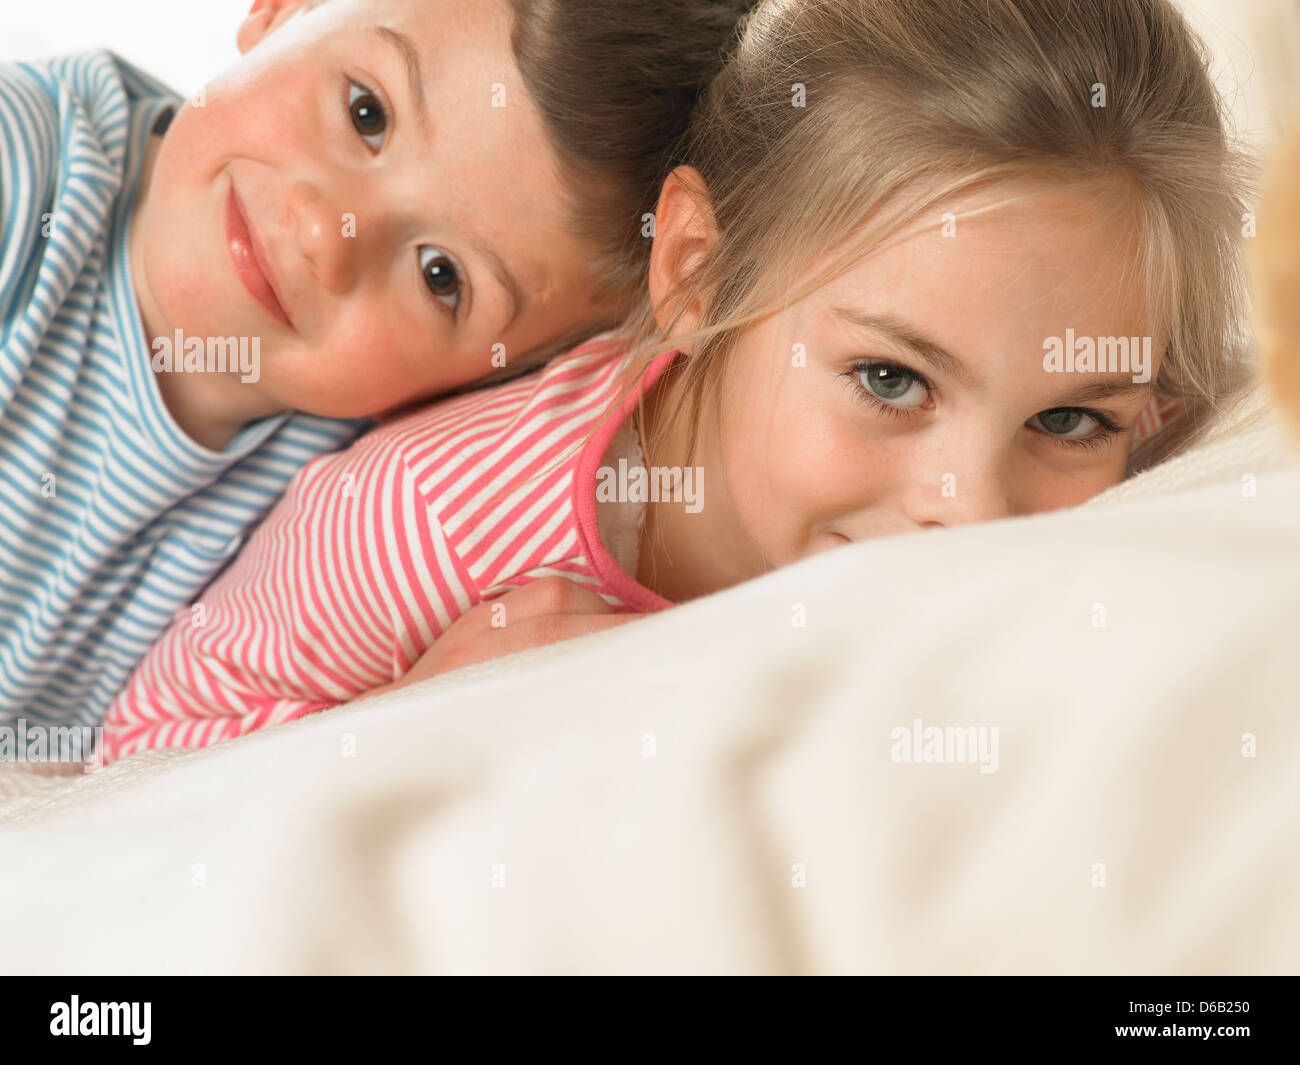 Children smiling together on bed Stock Photo